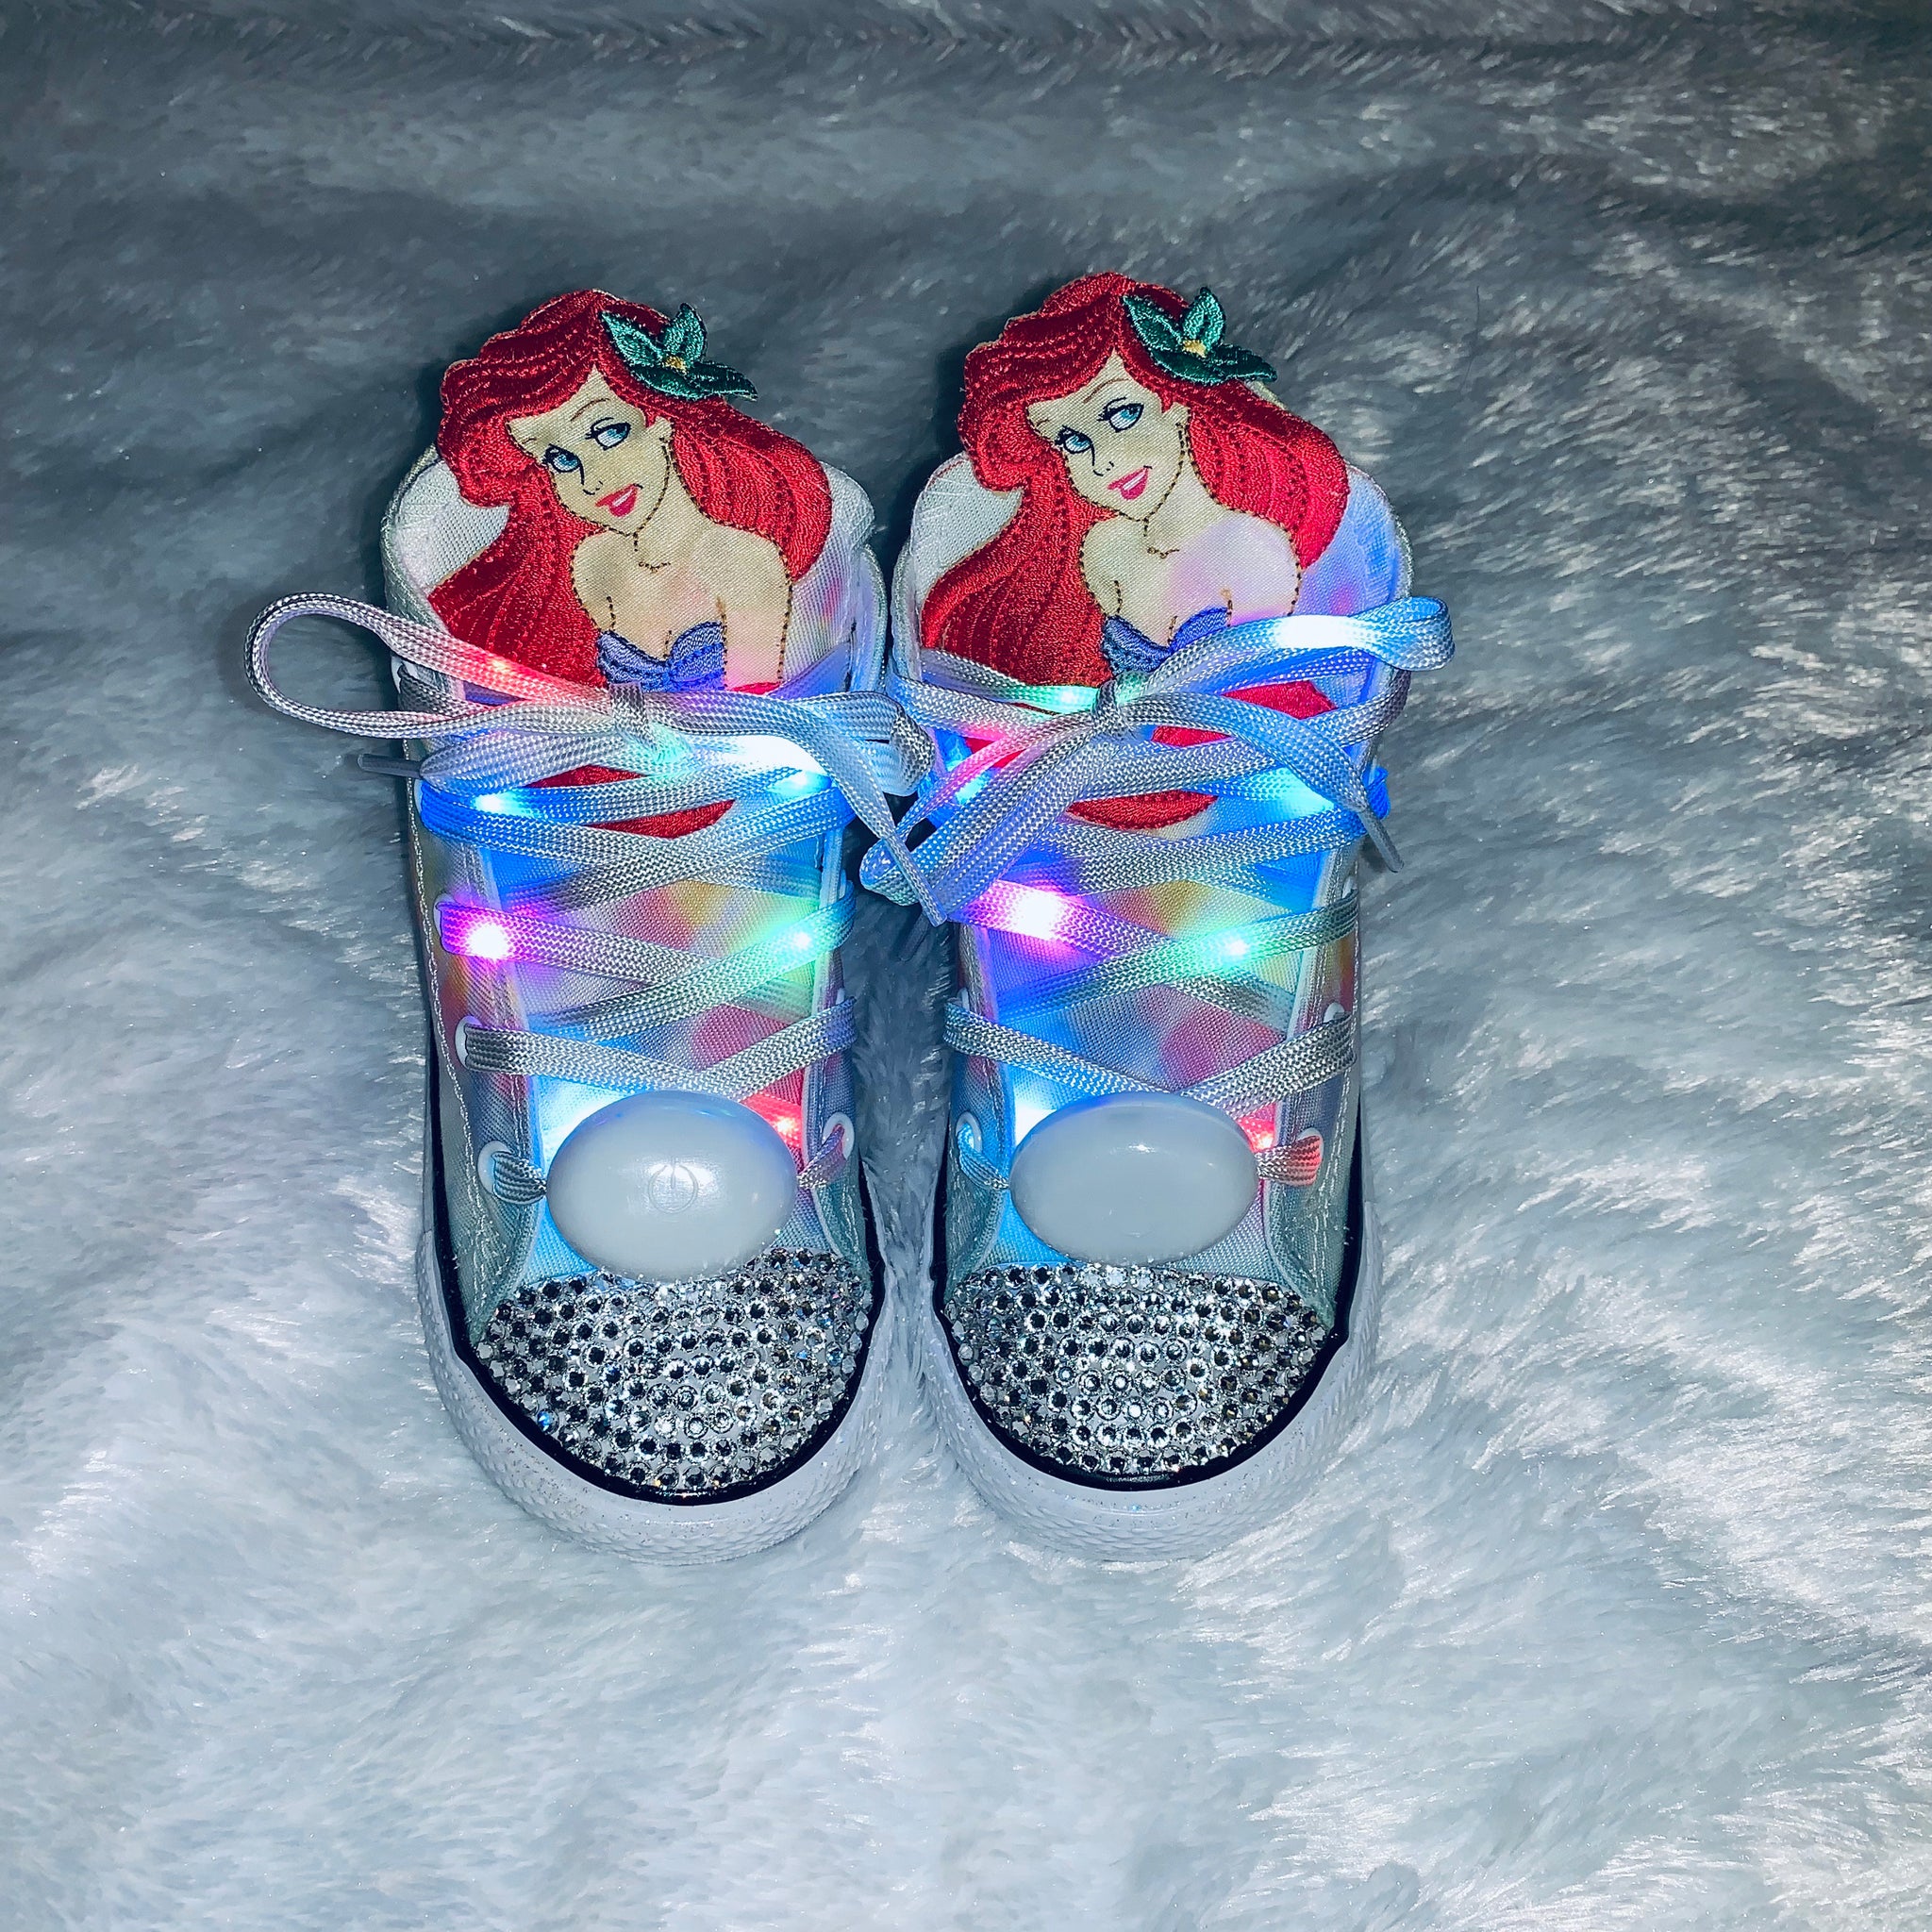 the little mermaid converse shoes